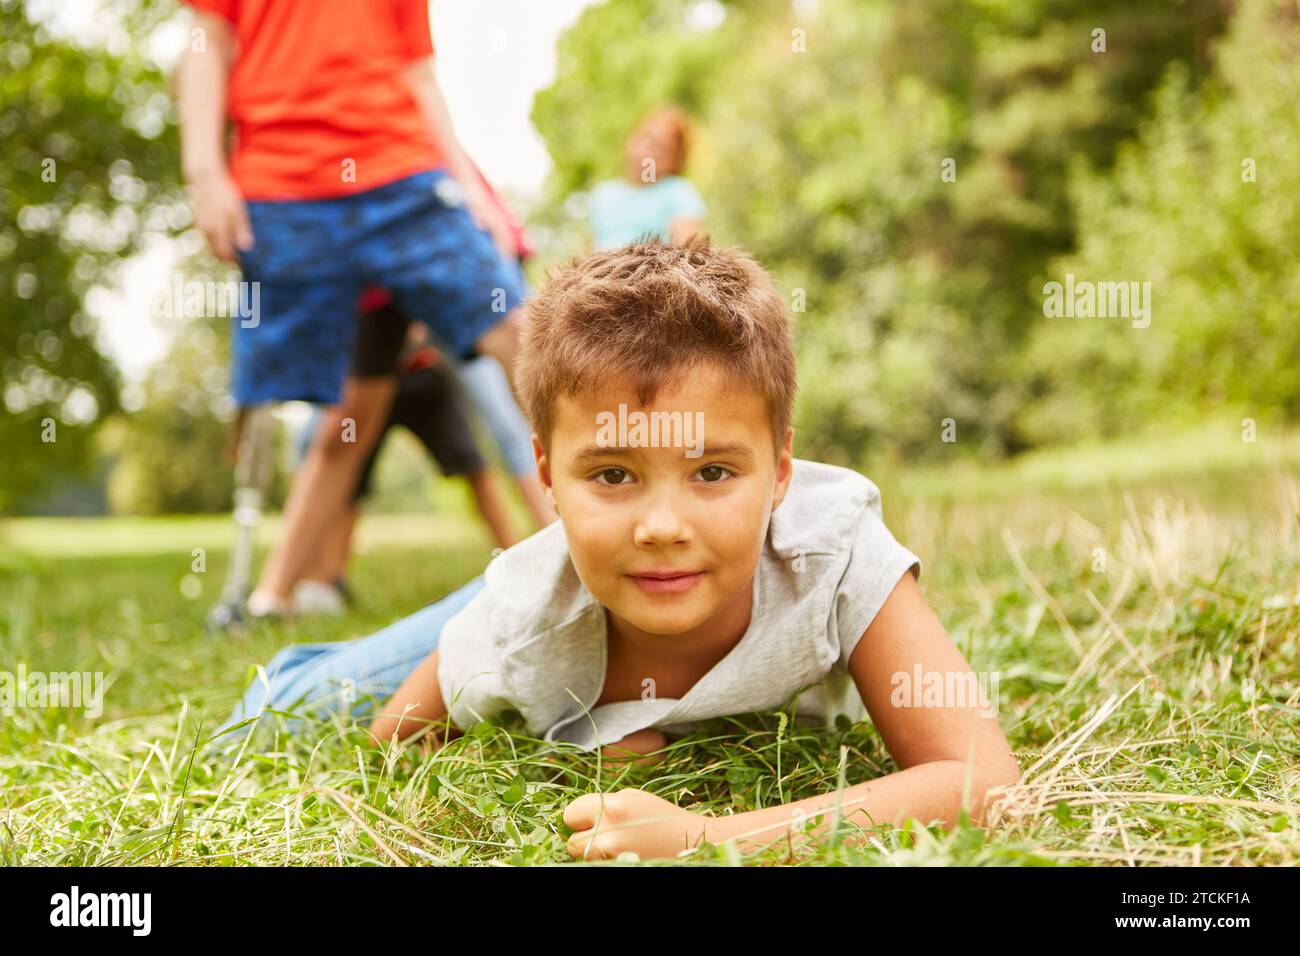 Portrait of boy lying down on grass while playing at park Stock Photo